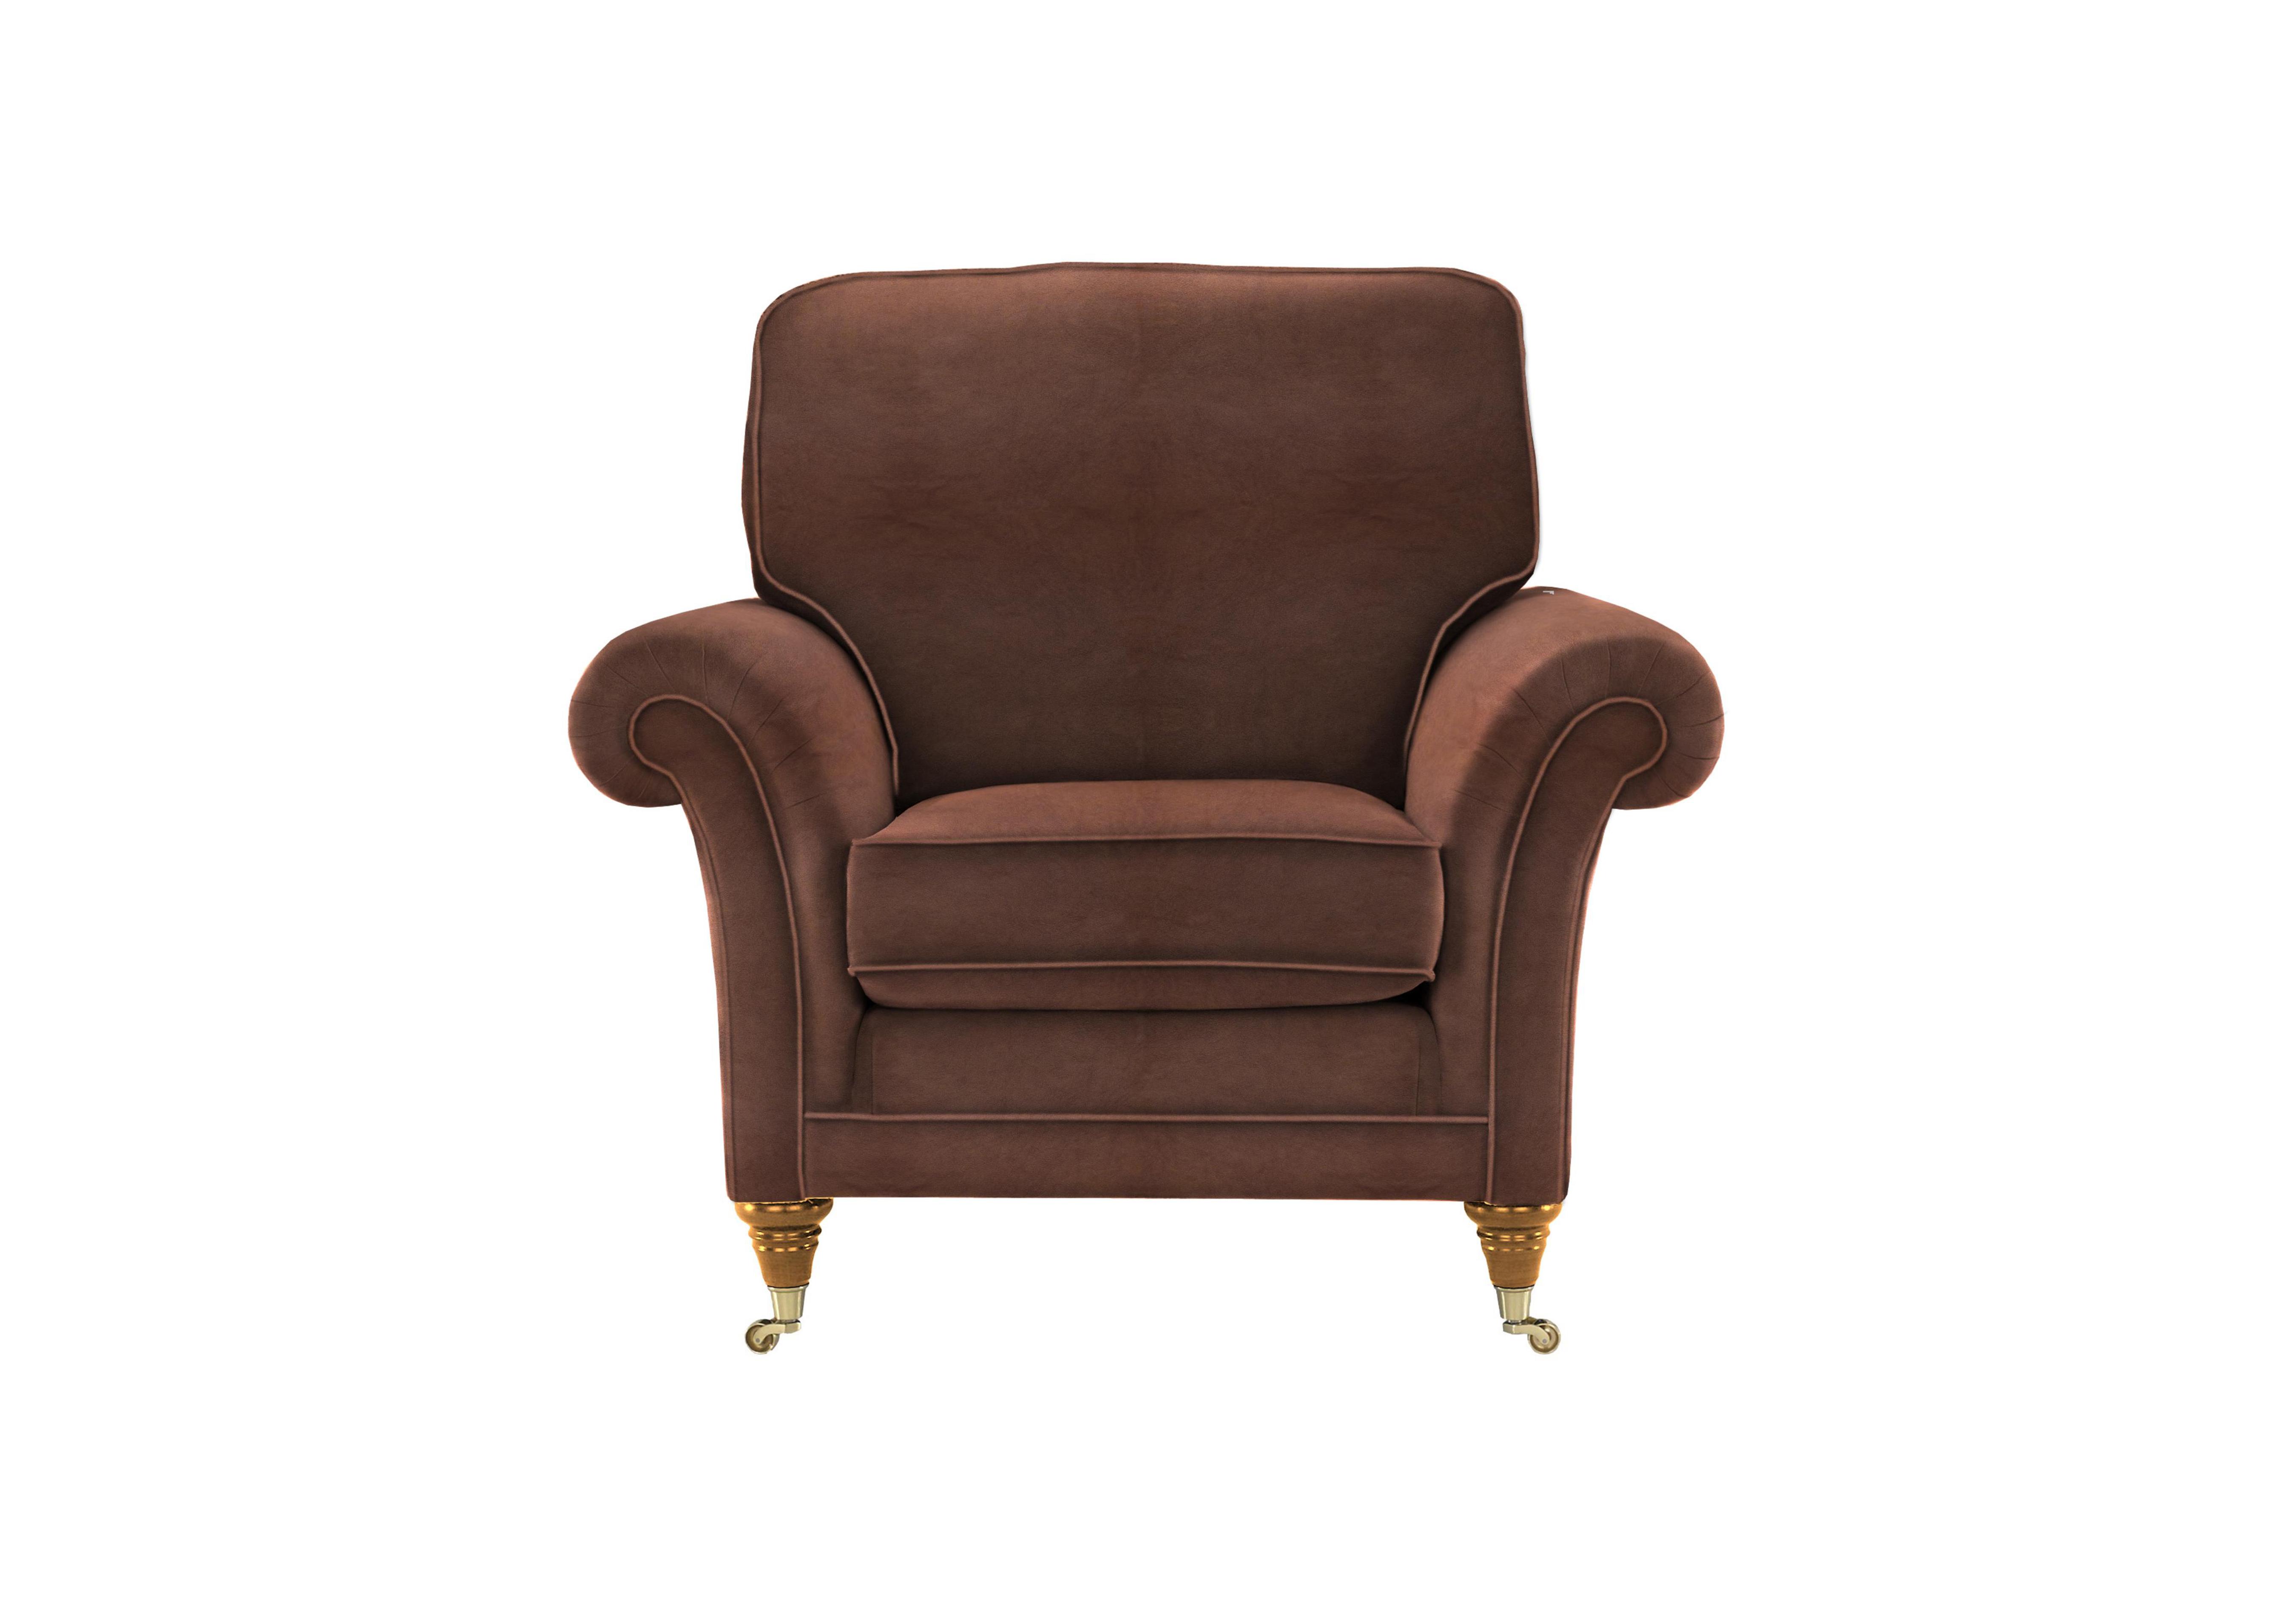 Burghley Leather Chair in London Saddle 001033-0021 on Furniture Village